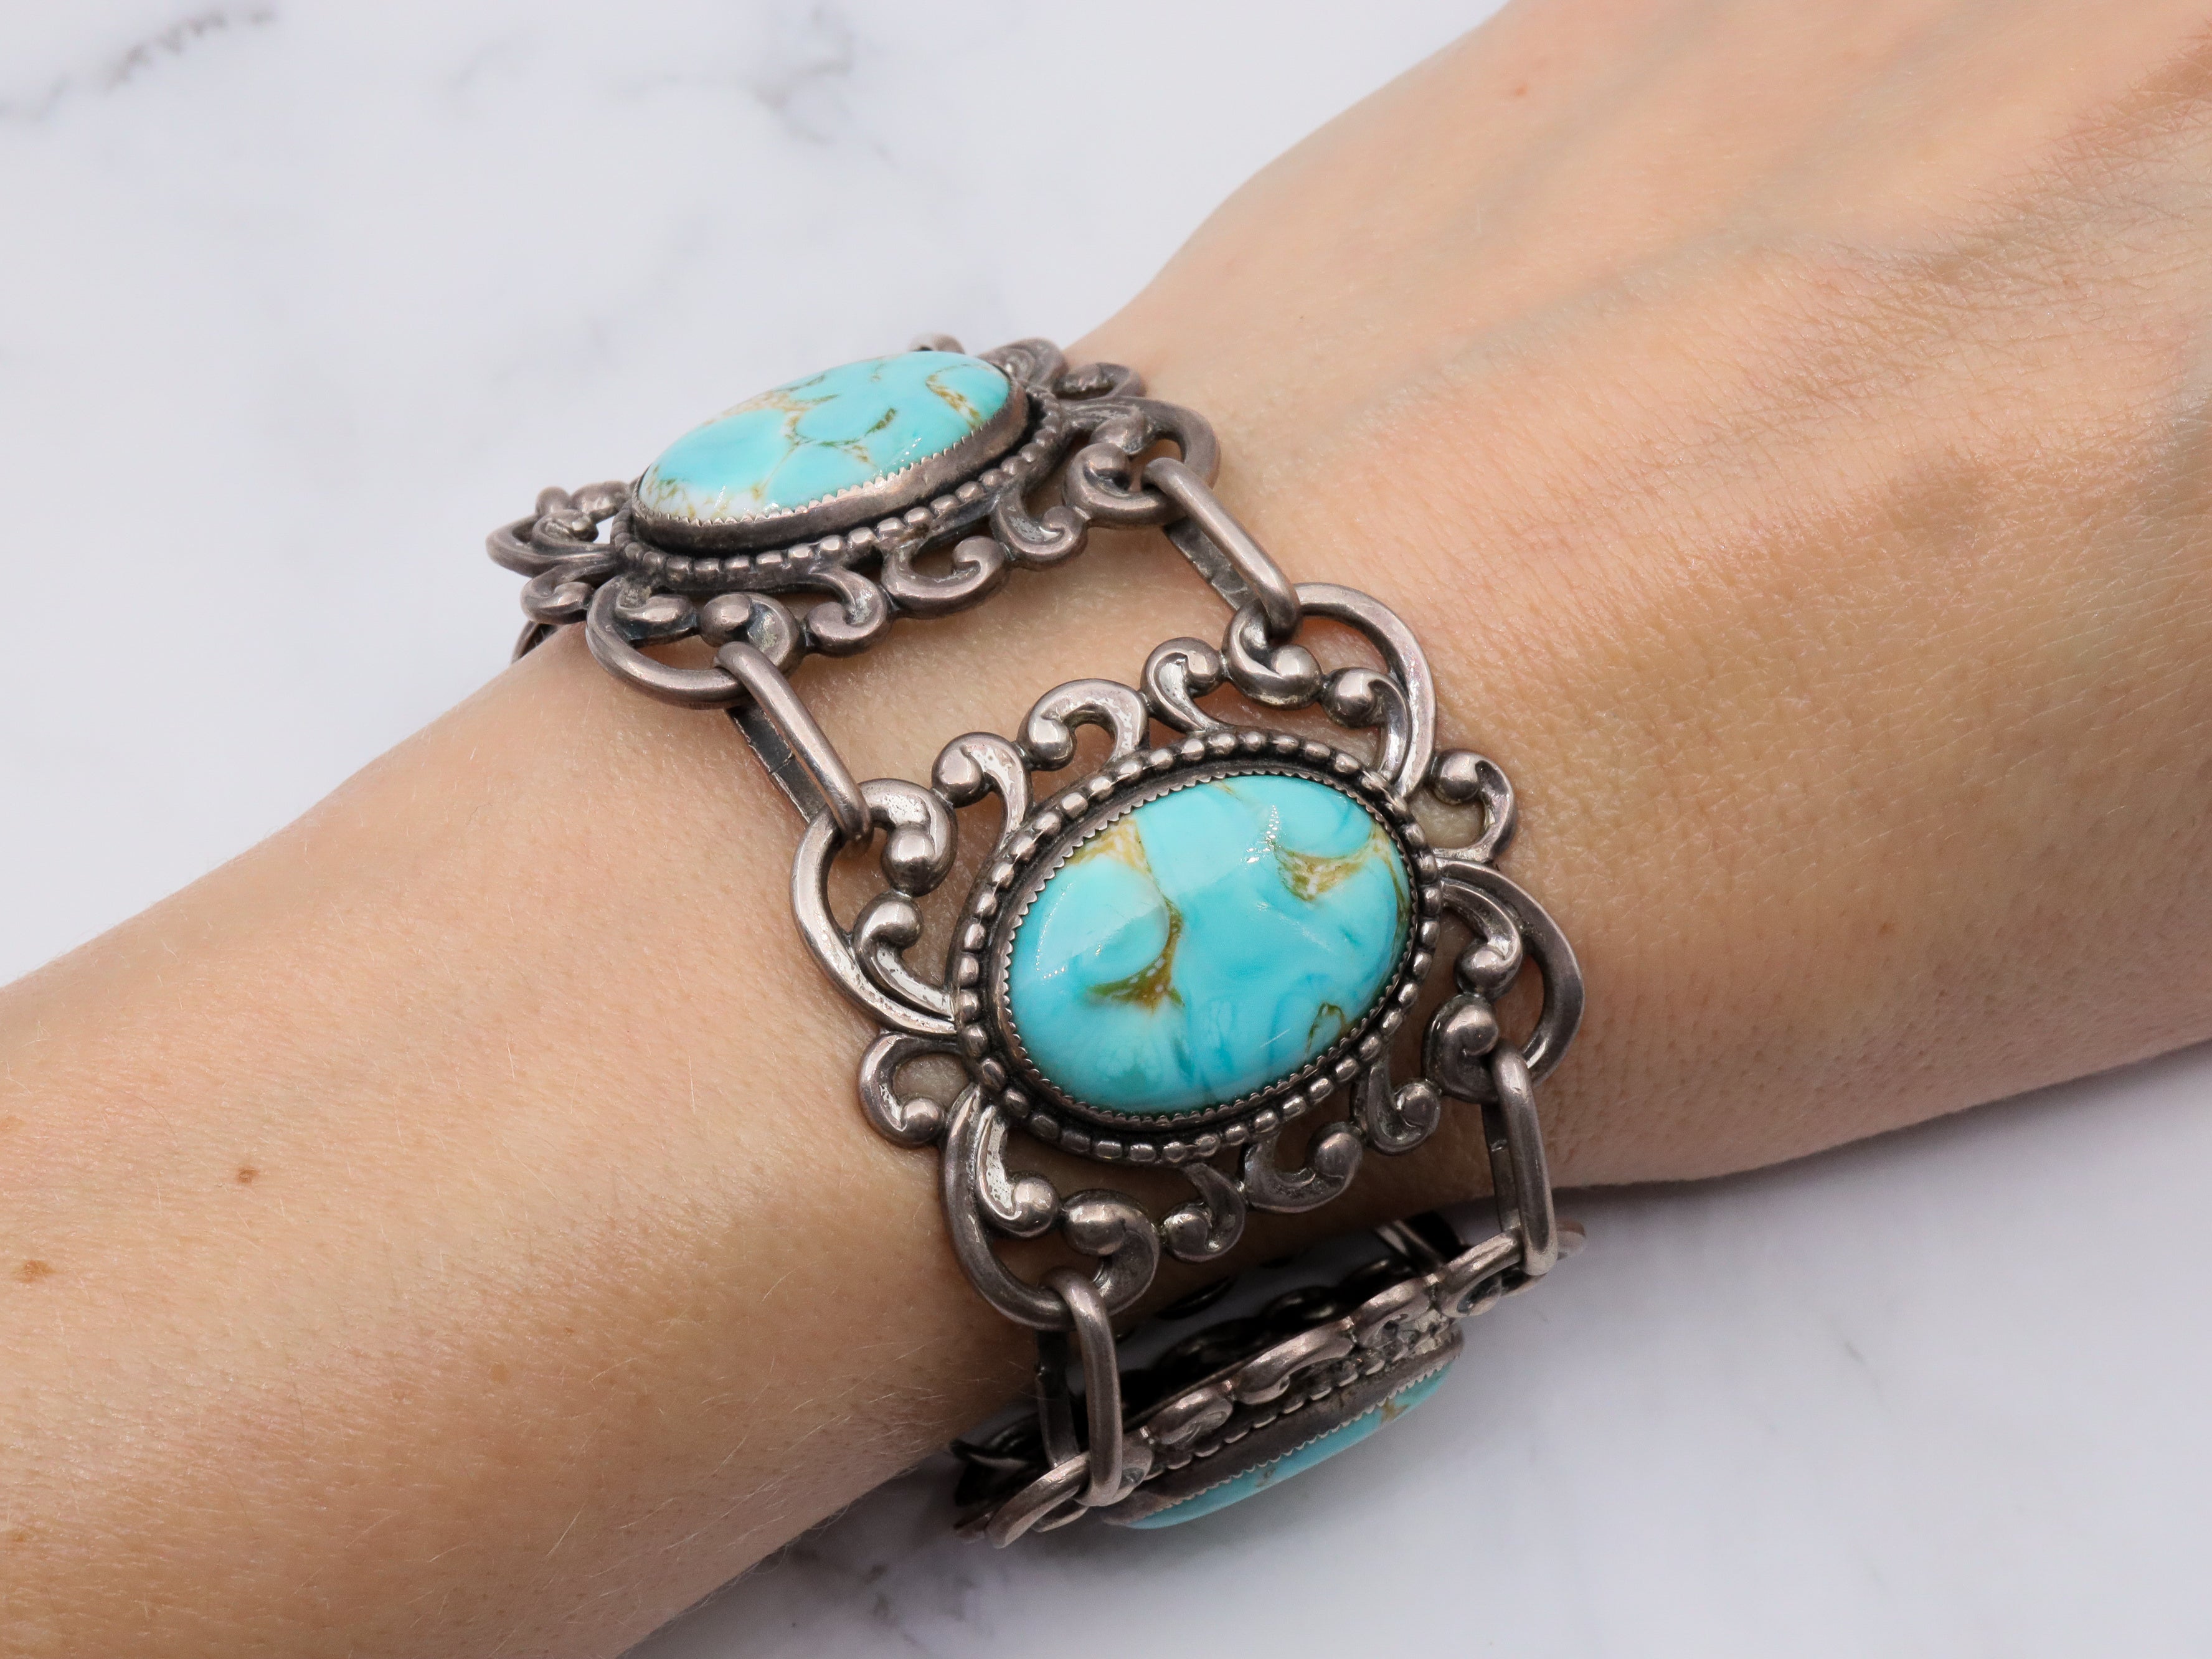 Vintage Mid Century Danecraft sterling silver panel bracelet with turquoise art glass cabochons